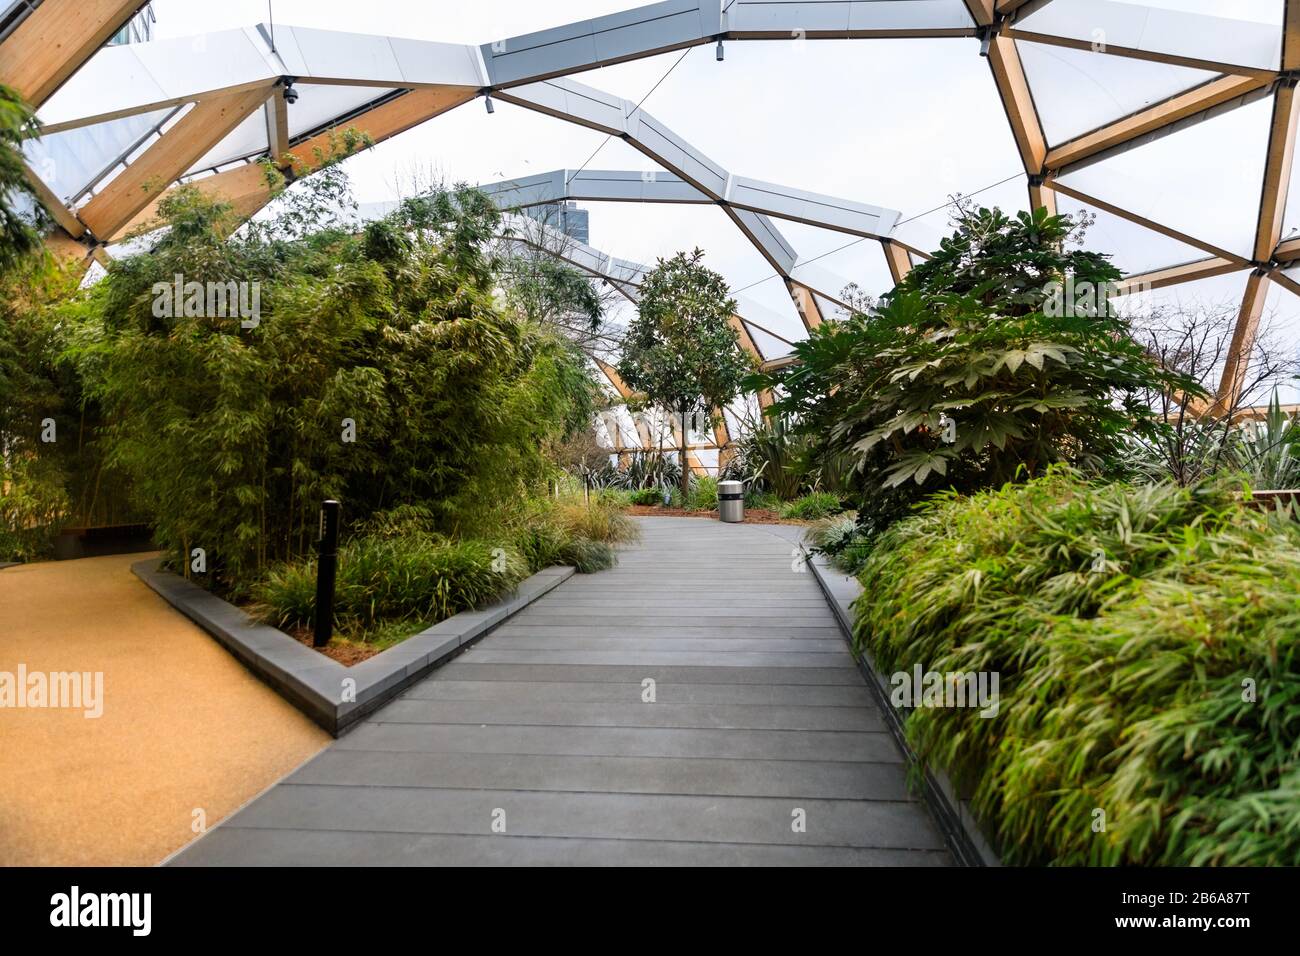 Crossrail Place Roof Garden, urban retreat and green architecture, Canary Wharf, London Stock Photo